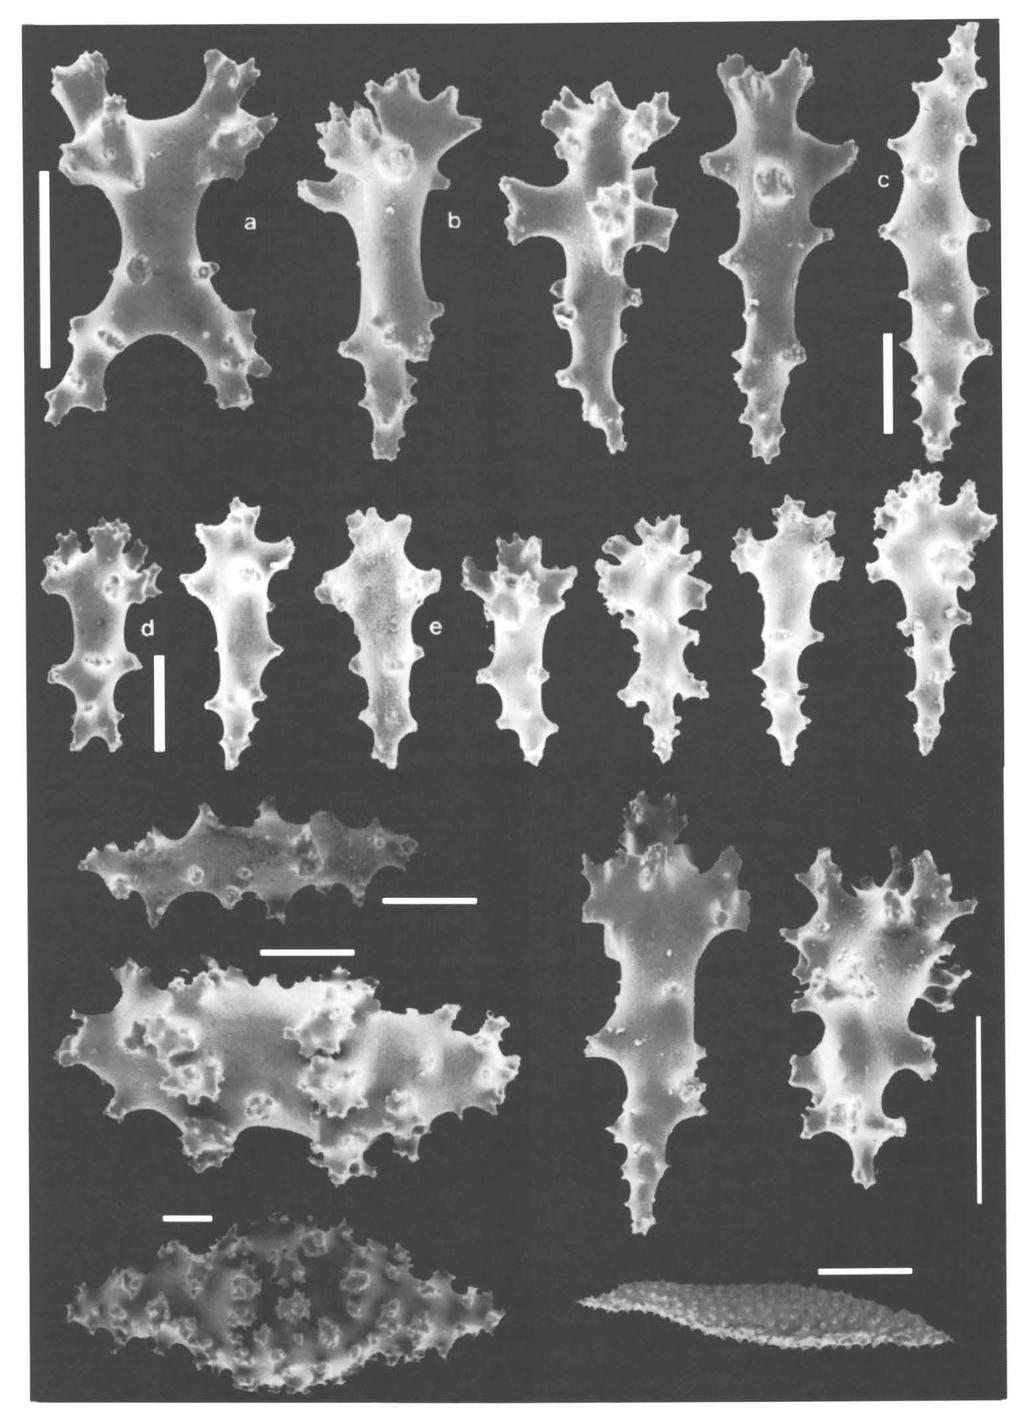 452 Vennam & van Ofwegen. Soft corals from the Laccadives. Zool. Med. Leiden 70 (1996) Fig. 13. Sinularia gravis Tixier-Durivault, 1970 (RMNH Coel.